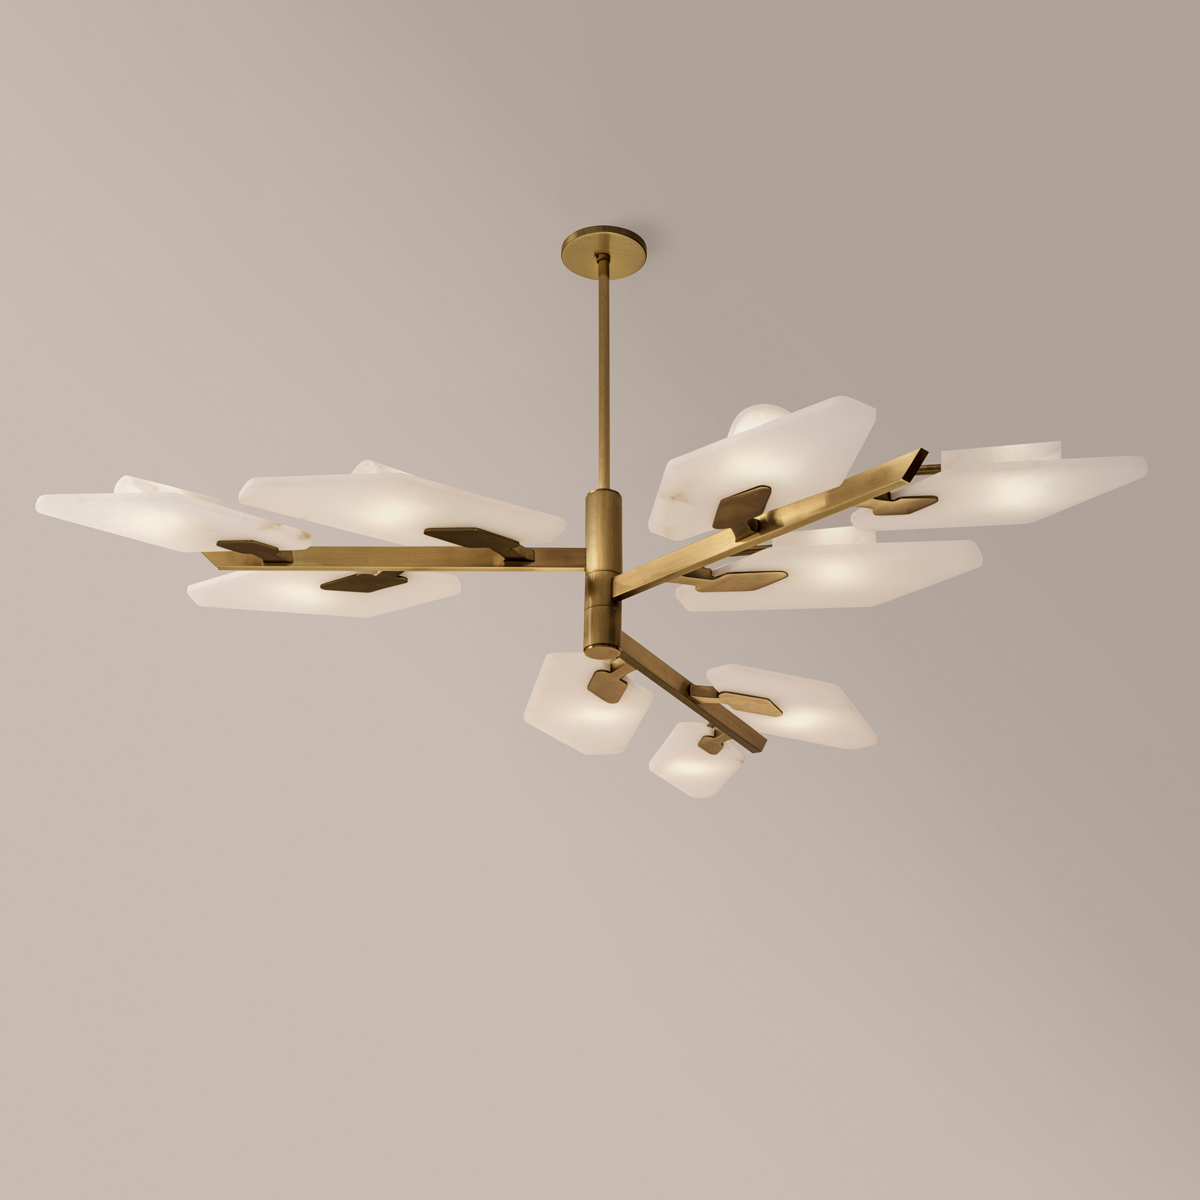 Leaf Ceiling Light by Gaspare Asaro